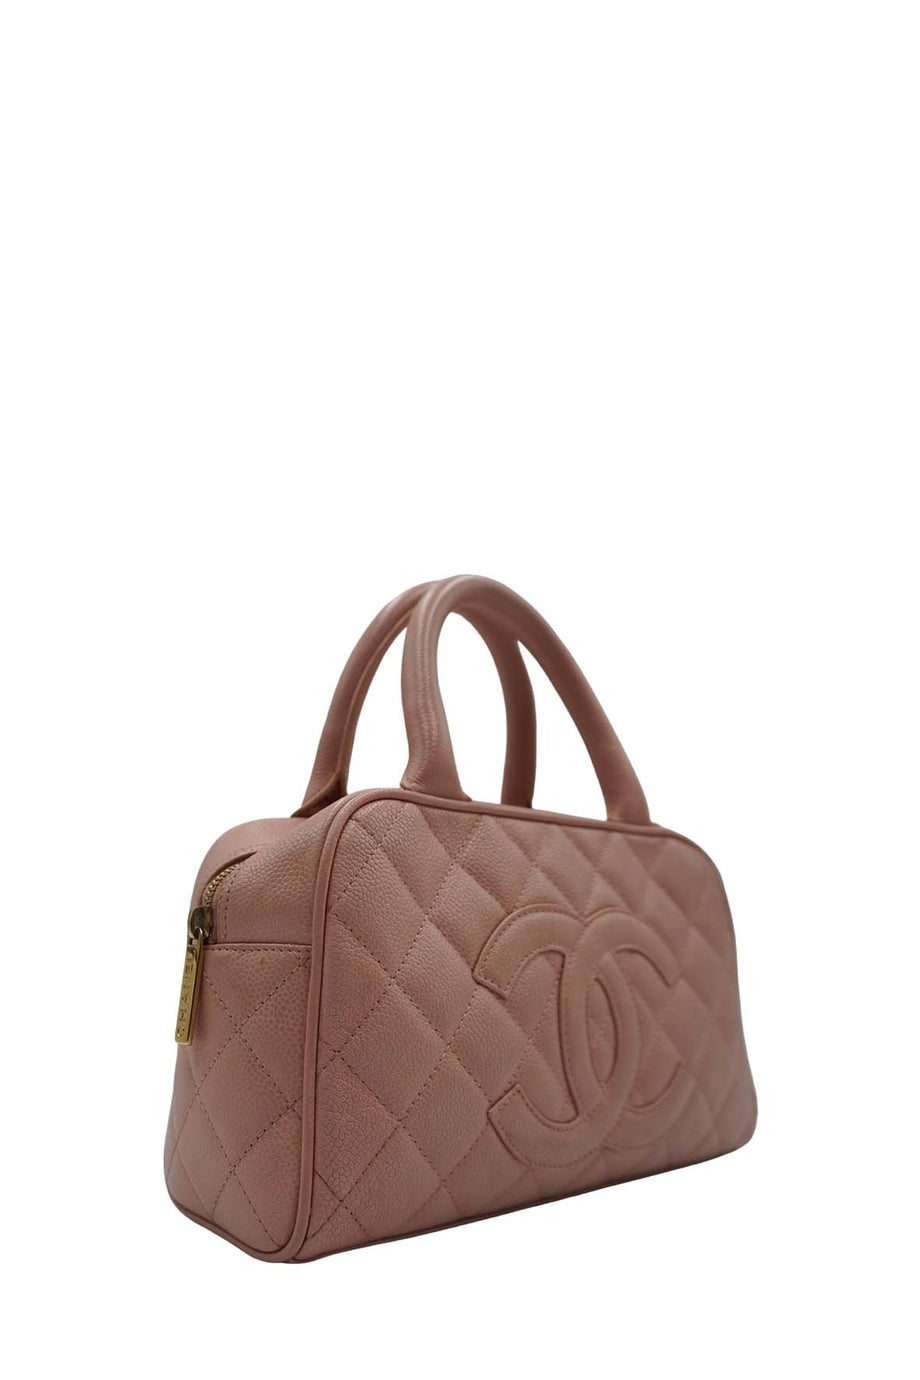 Chanel Light Pink Quilted Patent Leather Just Mademoiselle Large Bowling Bag   Yoogis Closet